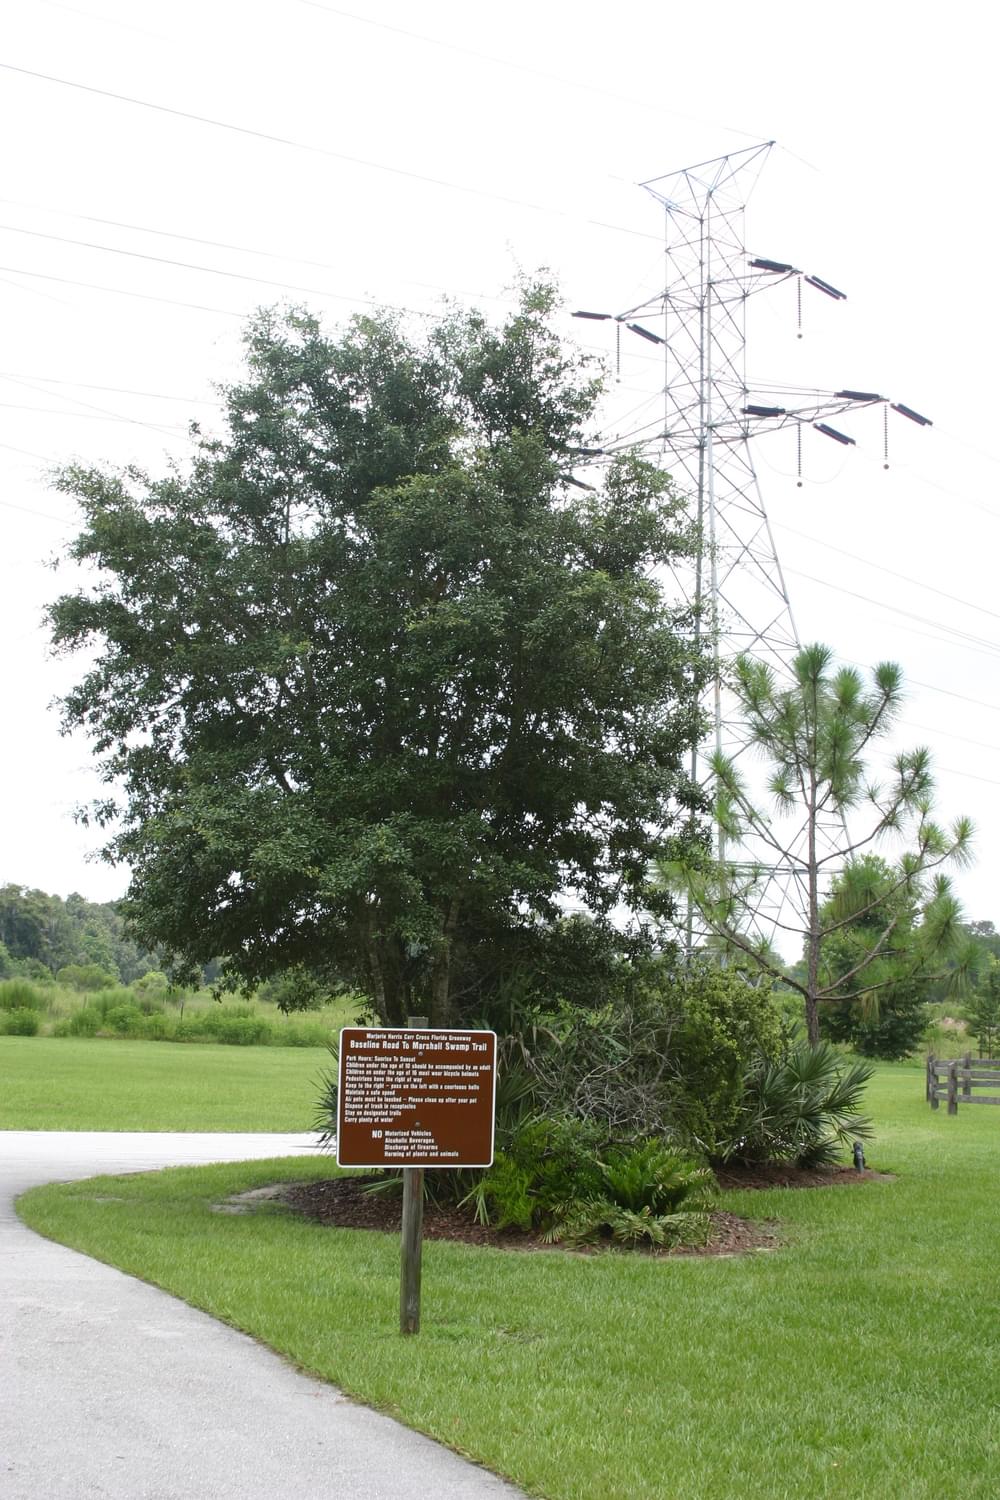 On the Marjorie Harris Carr Cross Florida Greenway south of Ocala, Florida